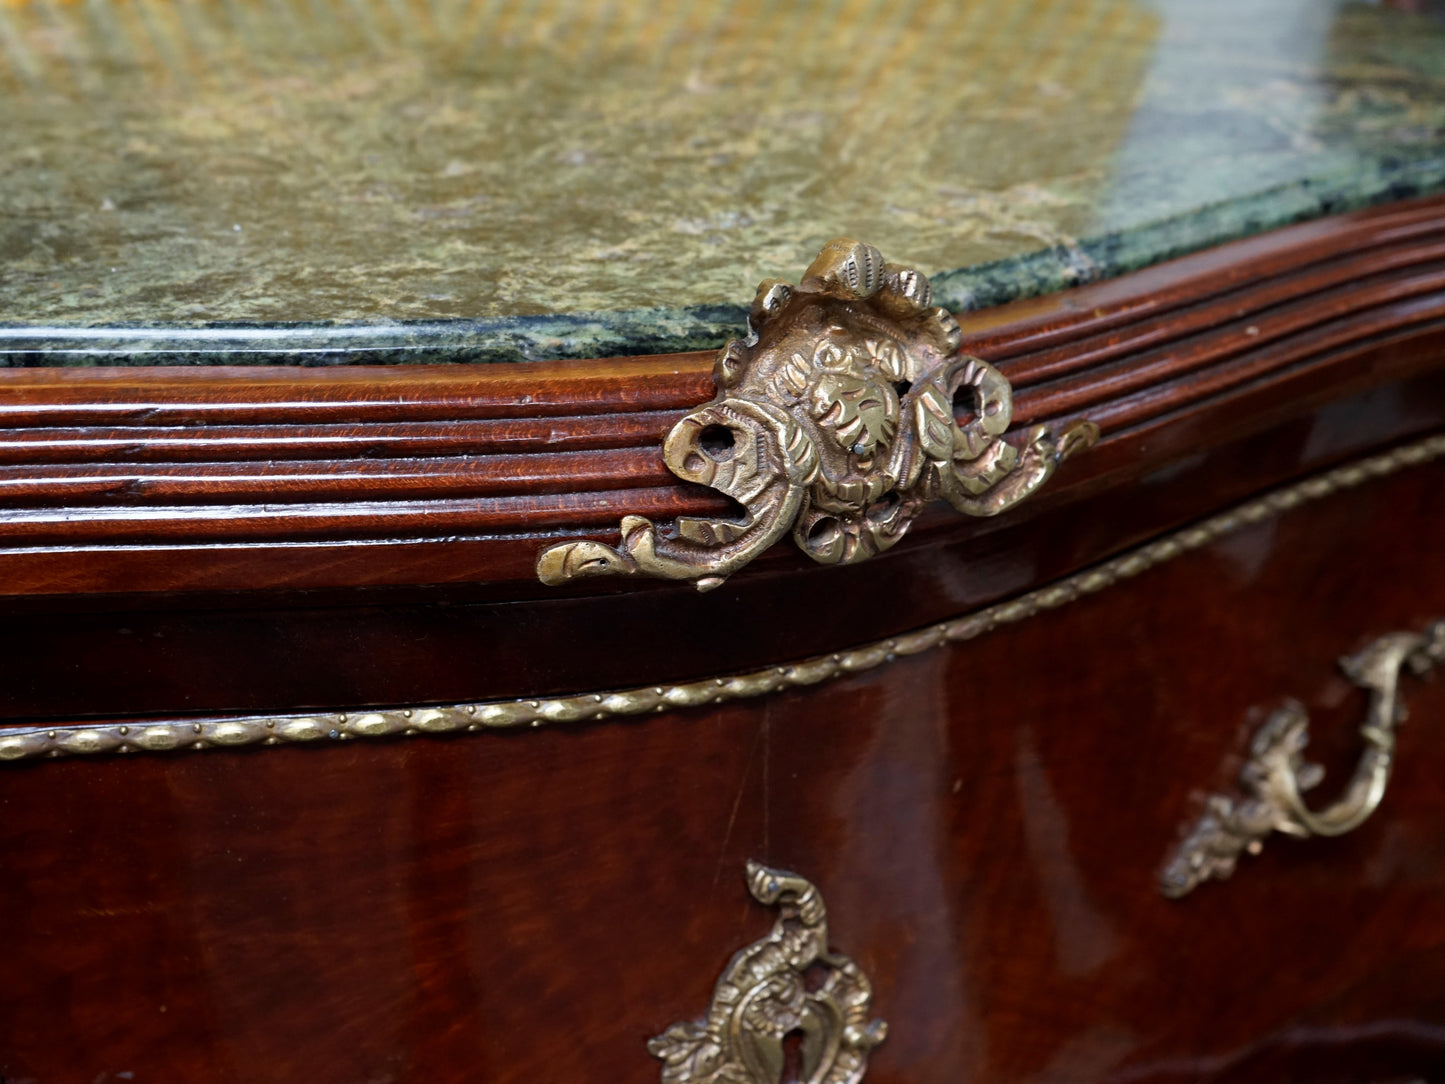 French Louis XV-Style Gilt Bronze Marble Top Mounted Commode